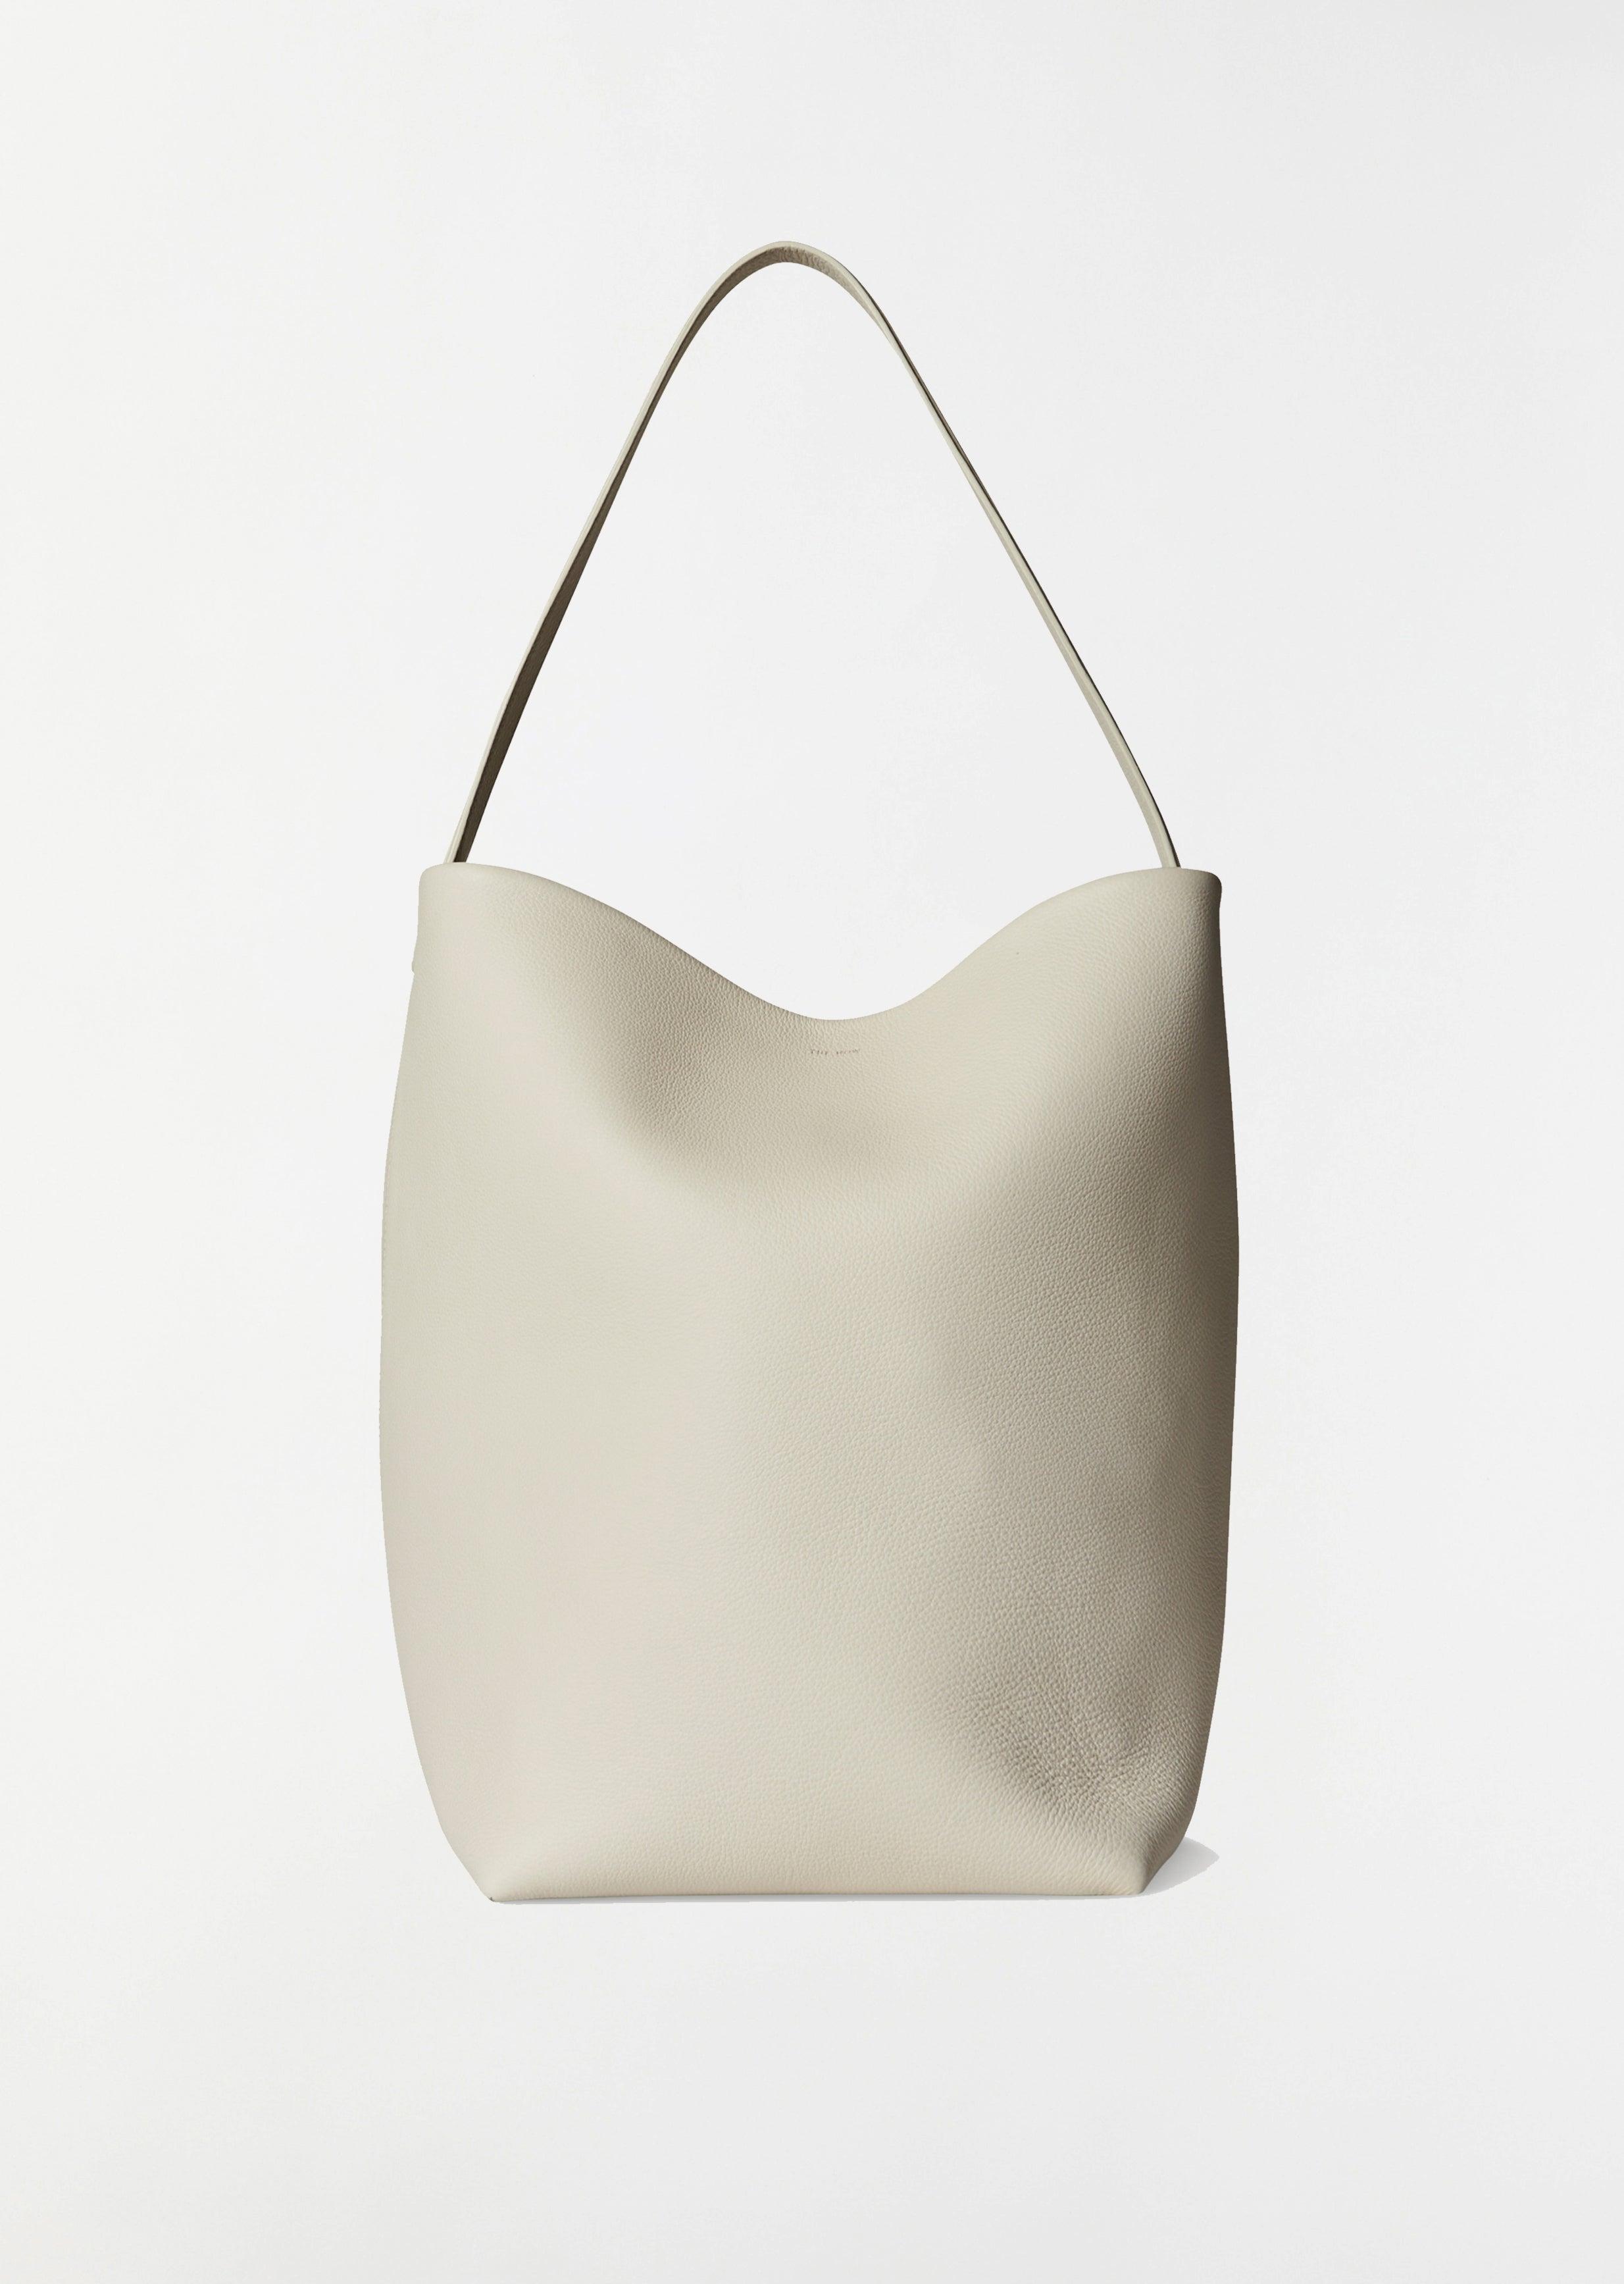 The Row Park Textured Leather Tote, $1,790